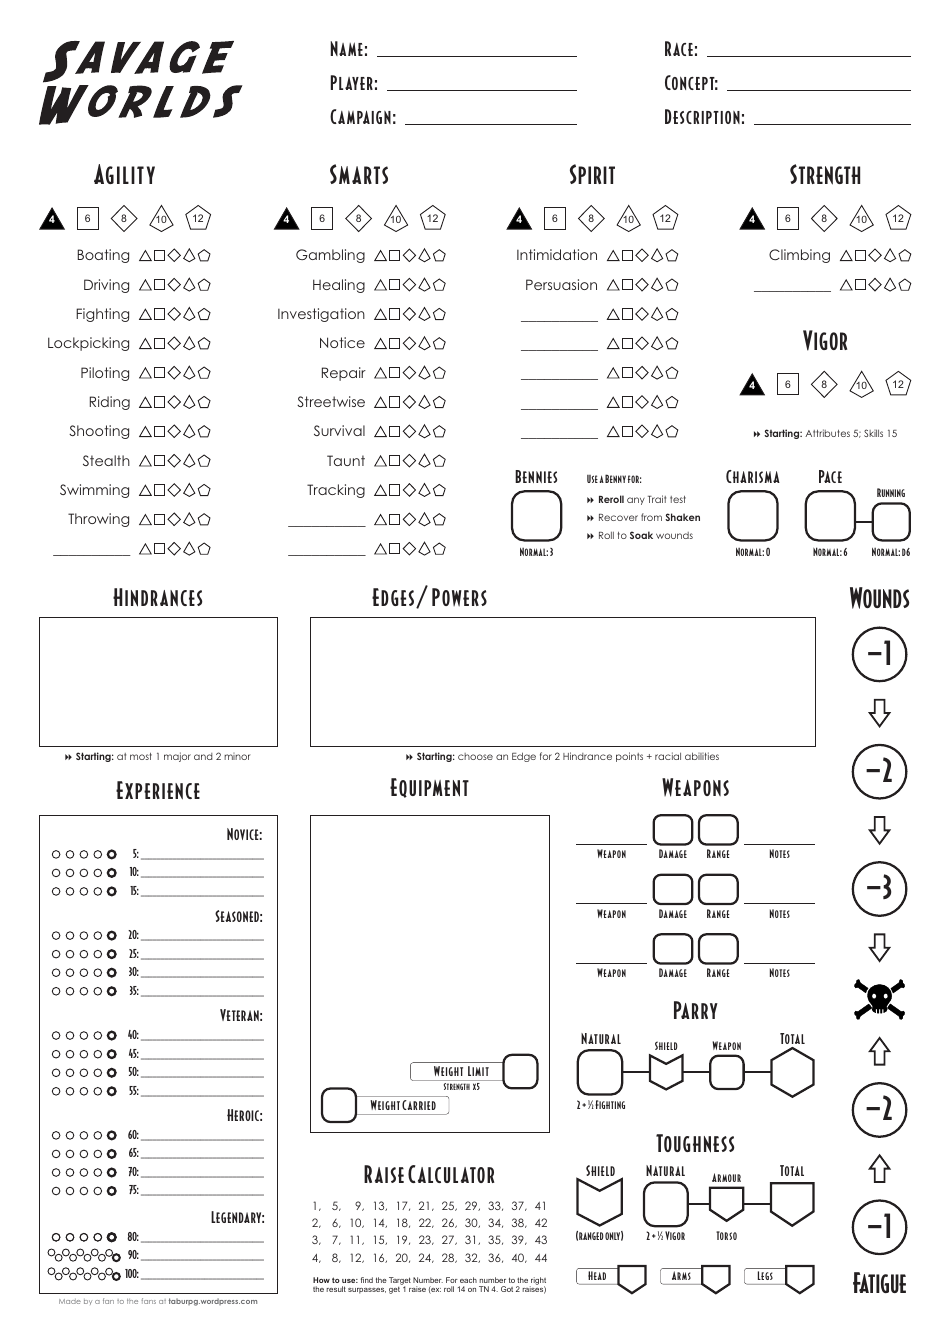 Savage Worlds Fan Made Character Sheet Download Printable PDF ...